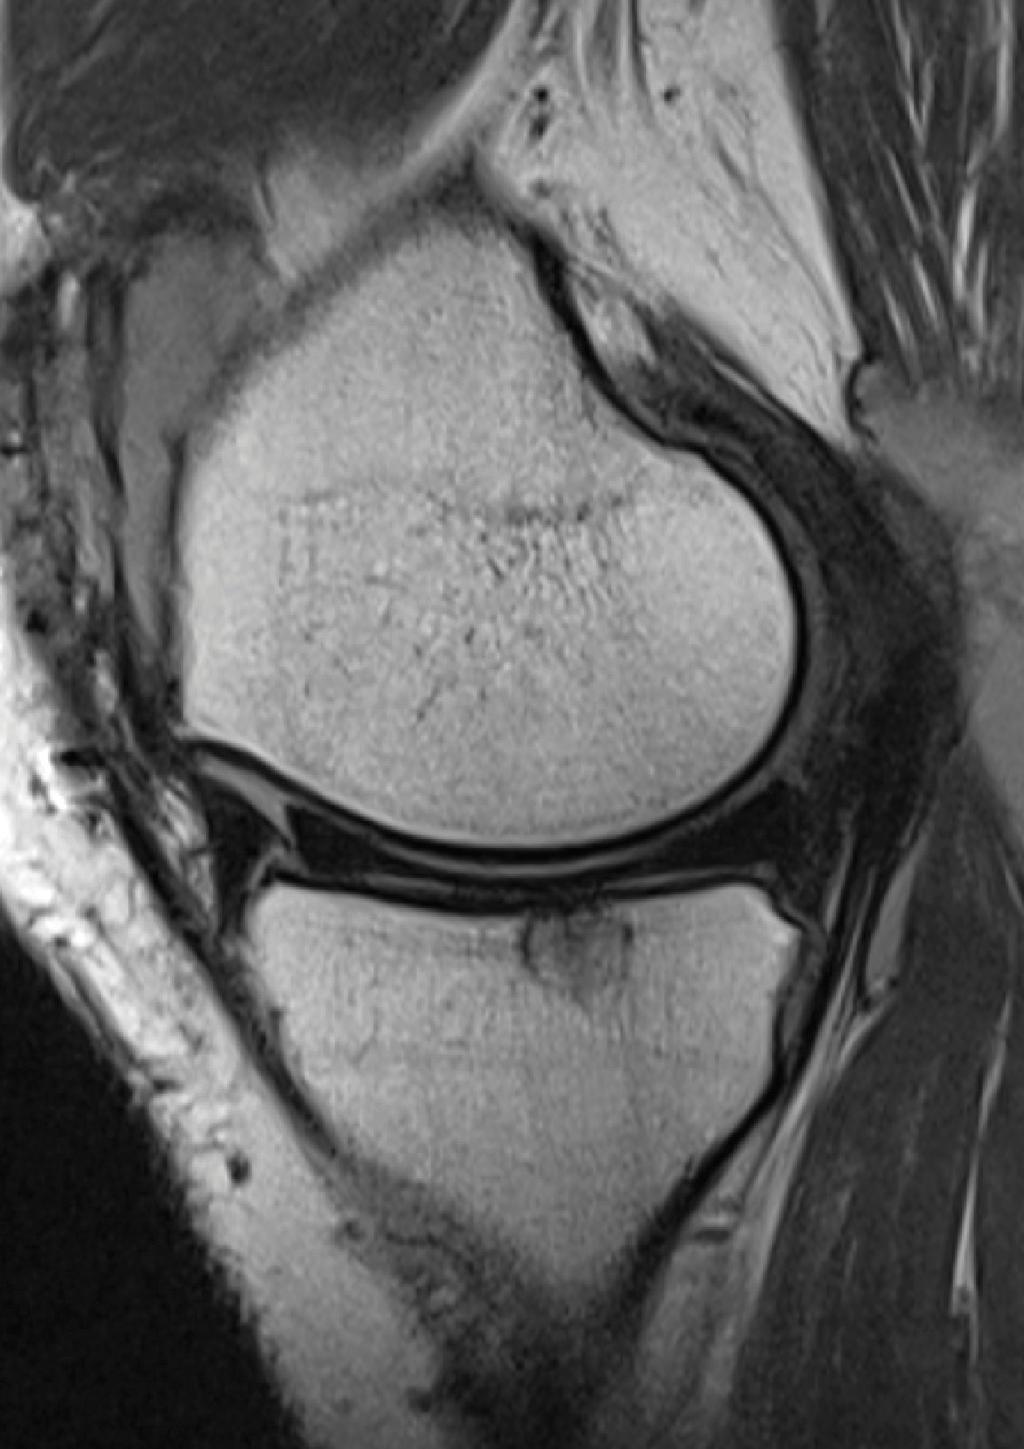 However, the MRI appearance at follow-up raised several concerns in both cases, showing the implants were reduced in size, with a hyperintense signal in most cases.